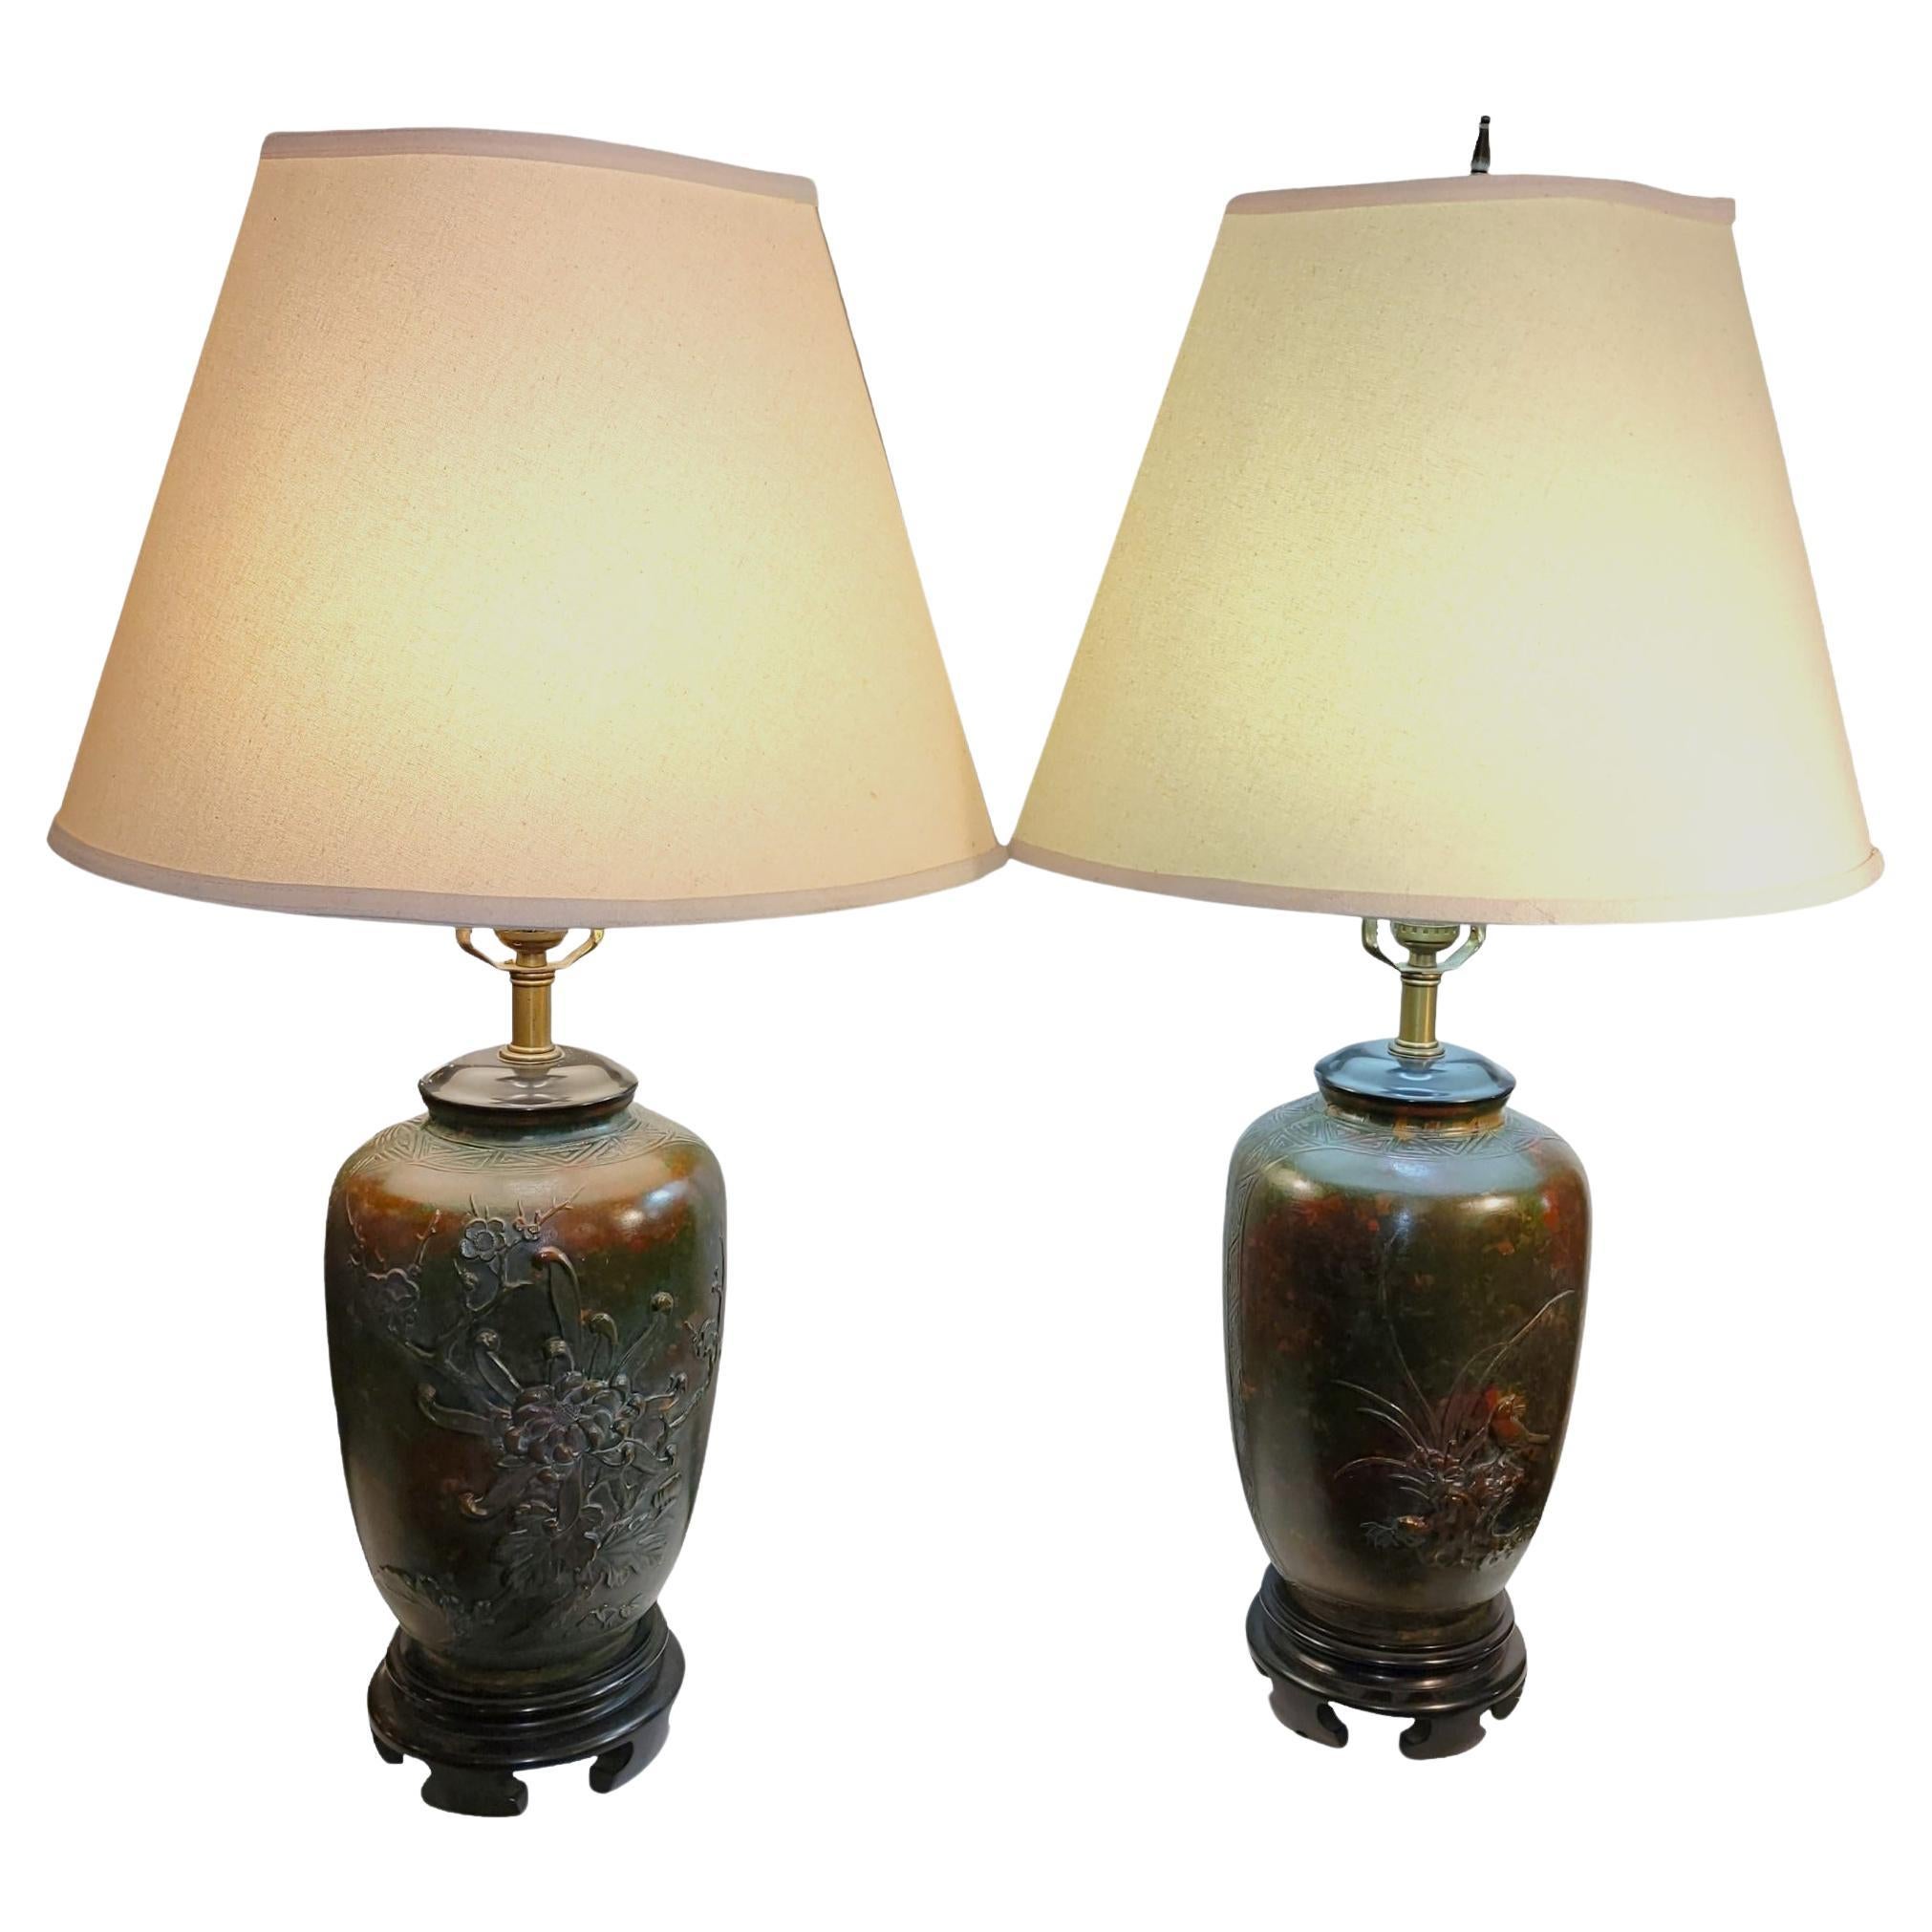 Pair of Marbo Los Angeles bronze table lamp. Floral and bird design with green and red colors throughout the entire design. Wonderful age and patina. Wooden dark brown base provides a touch of depth to the greens and reds. Both are in great working